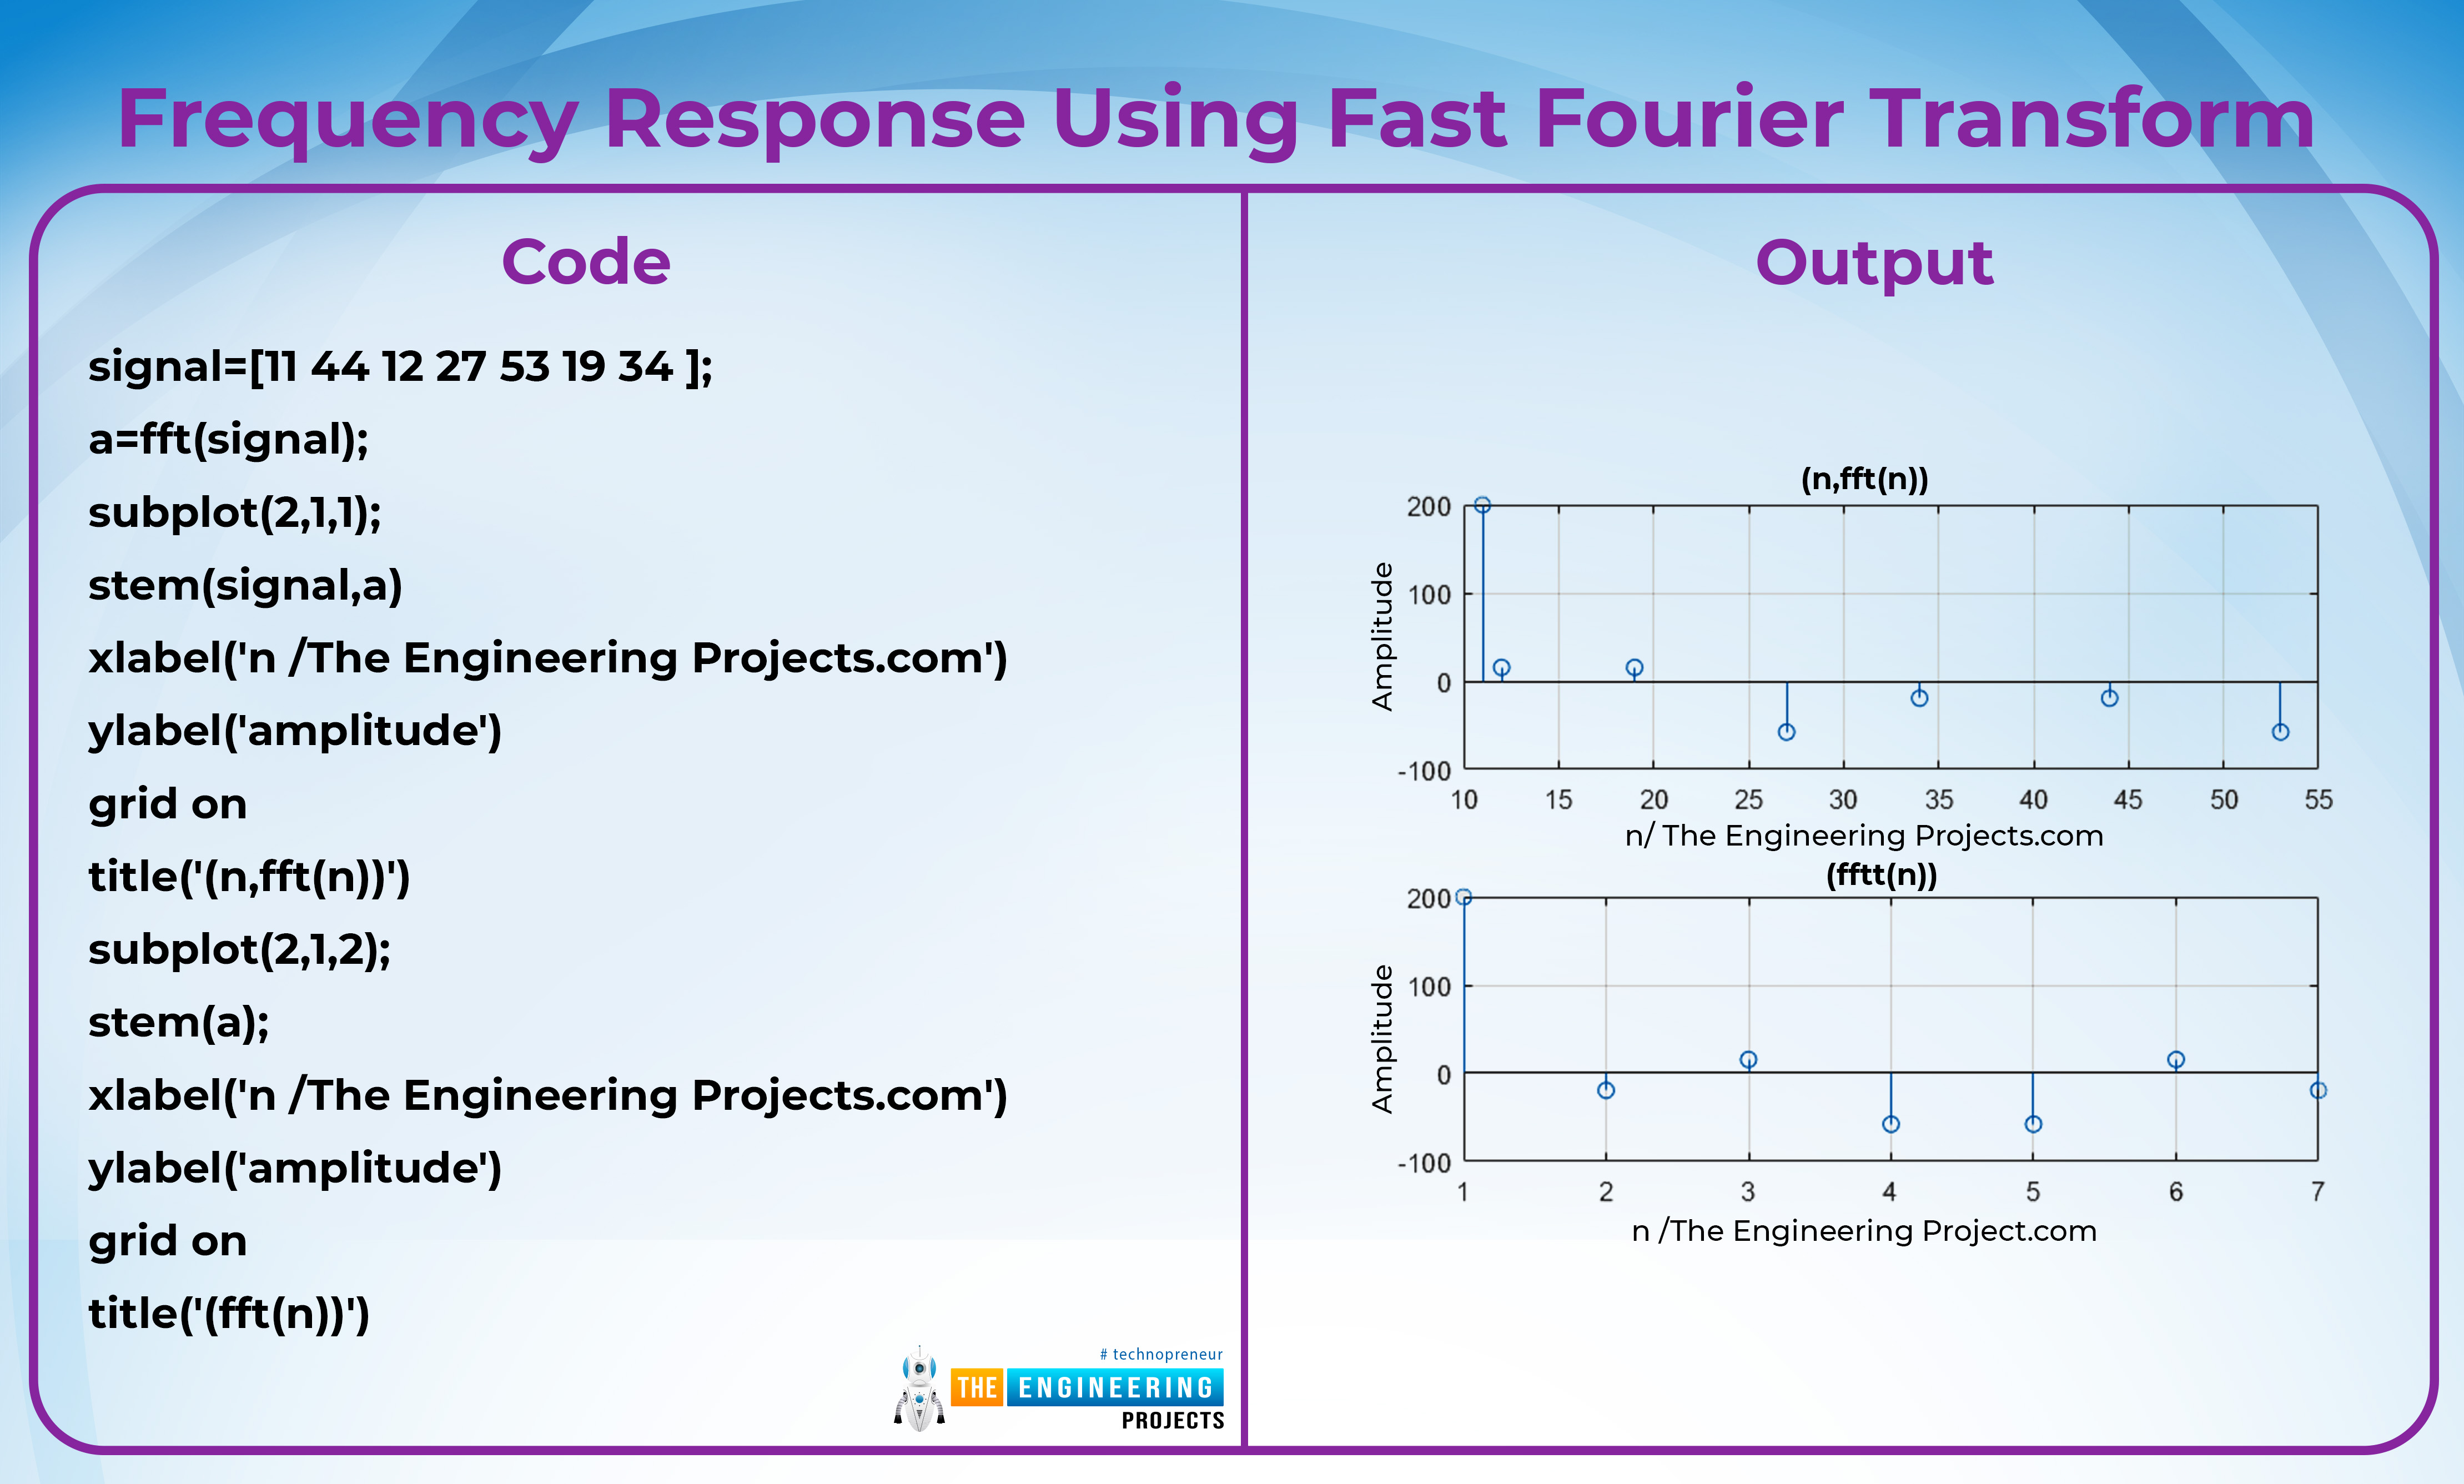 Frequency Response of LTI System, LTI frequency response, frequency LTI, LTI frequency, LTI freqency response in matlab, matlab LTI, LTI in MATLAB